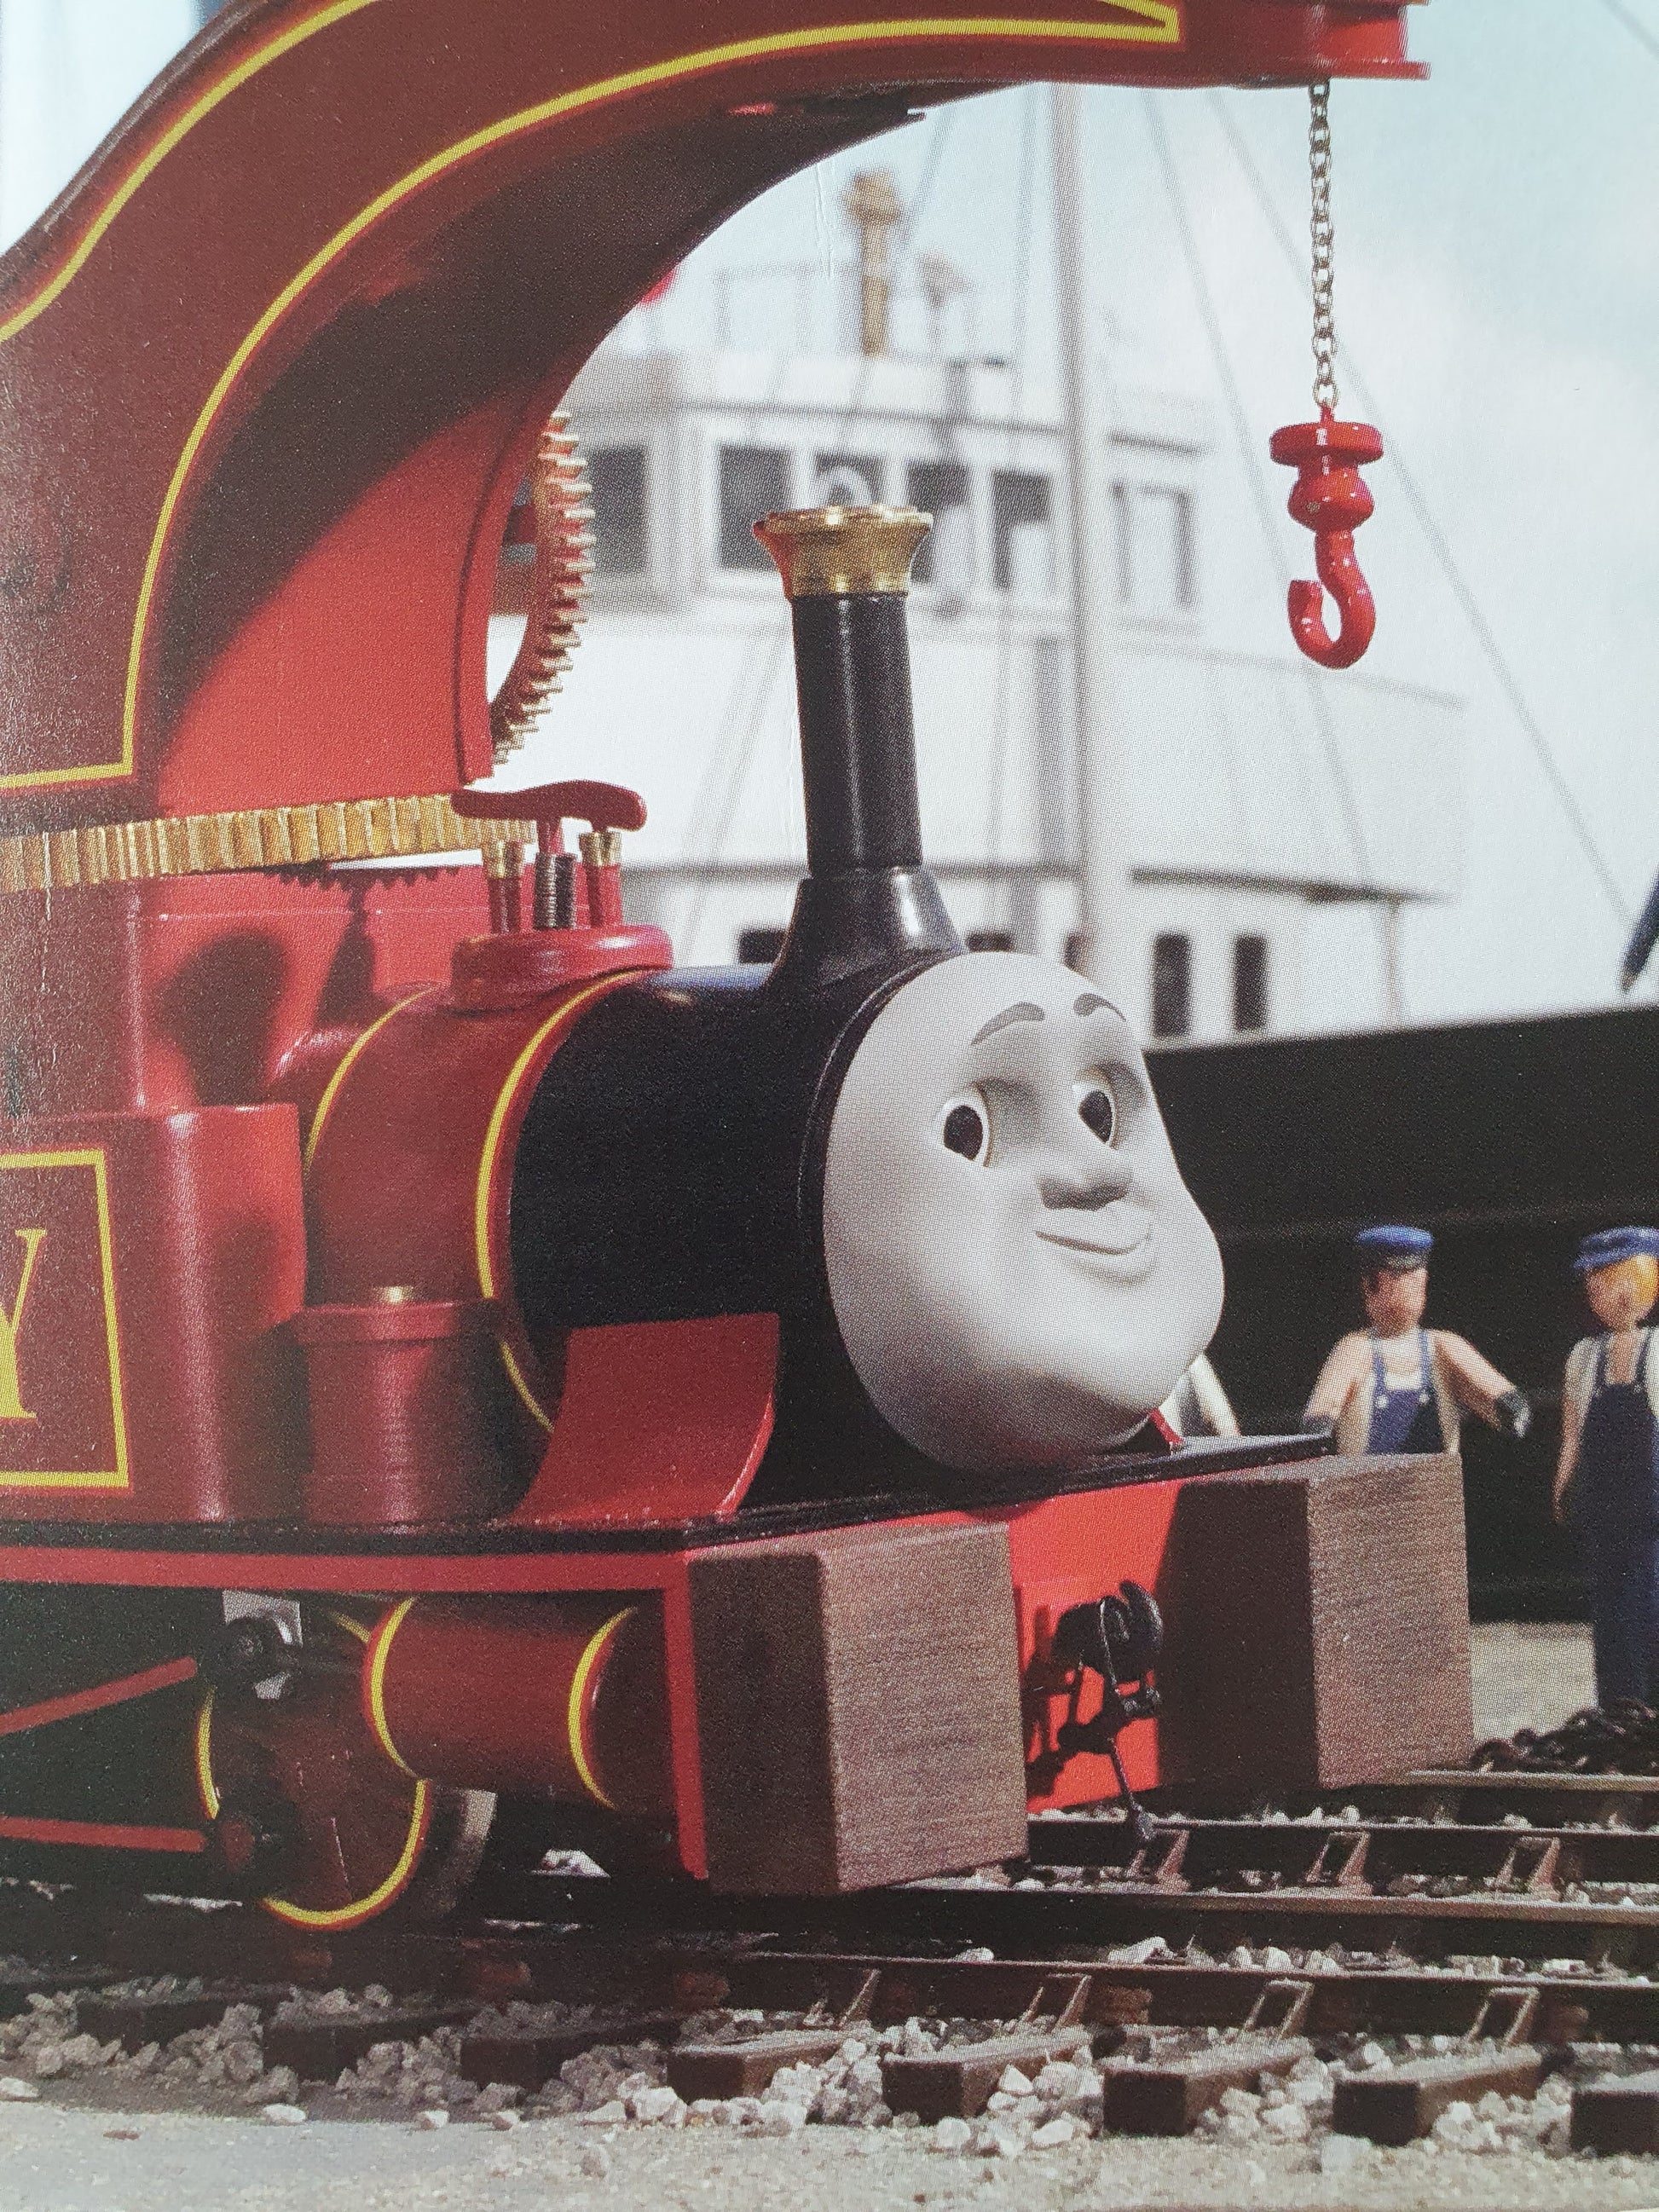 Harvey to the Rescue - The Thomas TV Series Very Good,0-5 Yrs Recuddles.ch  (6637198573753)